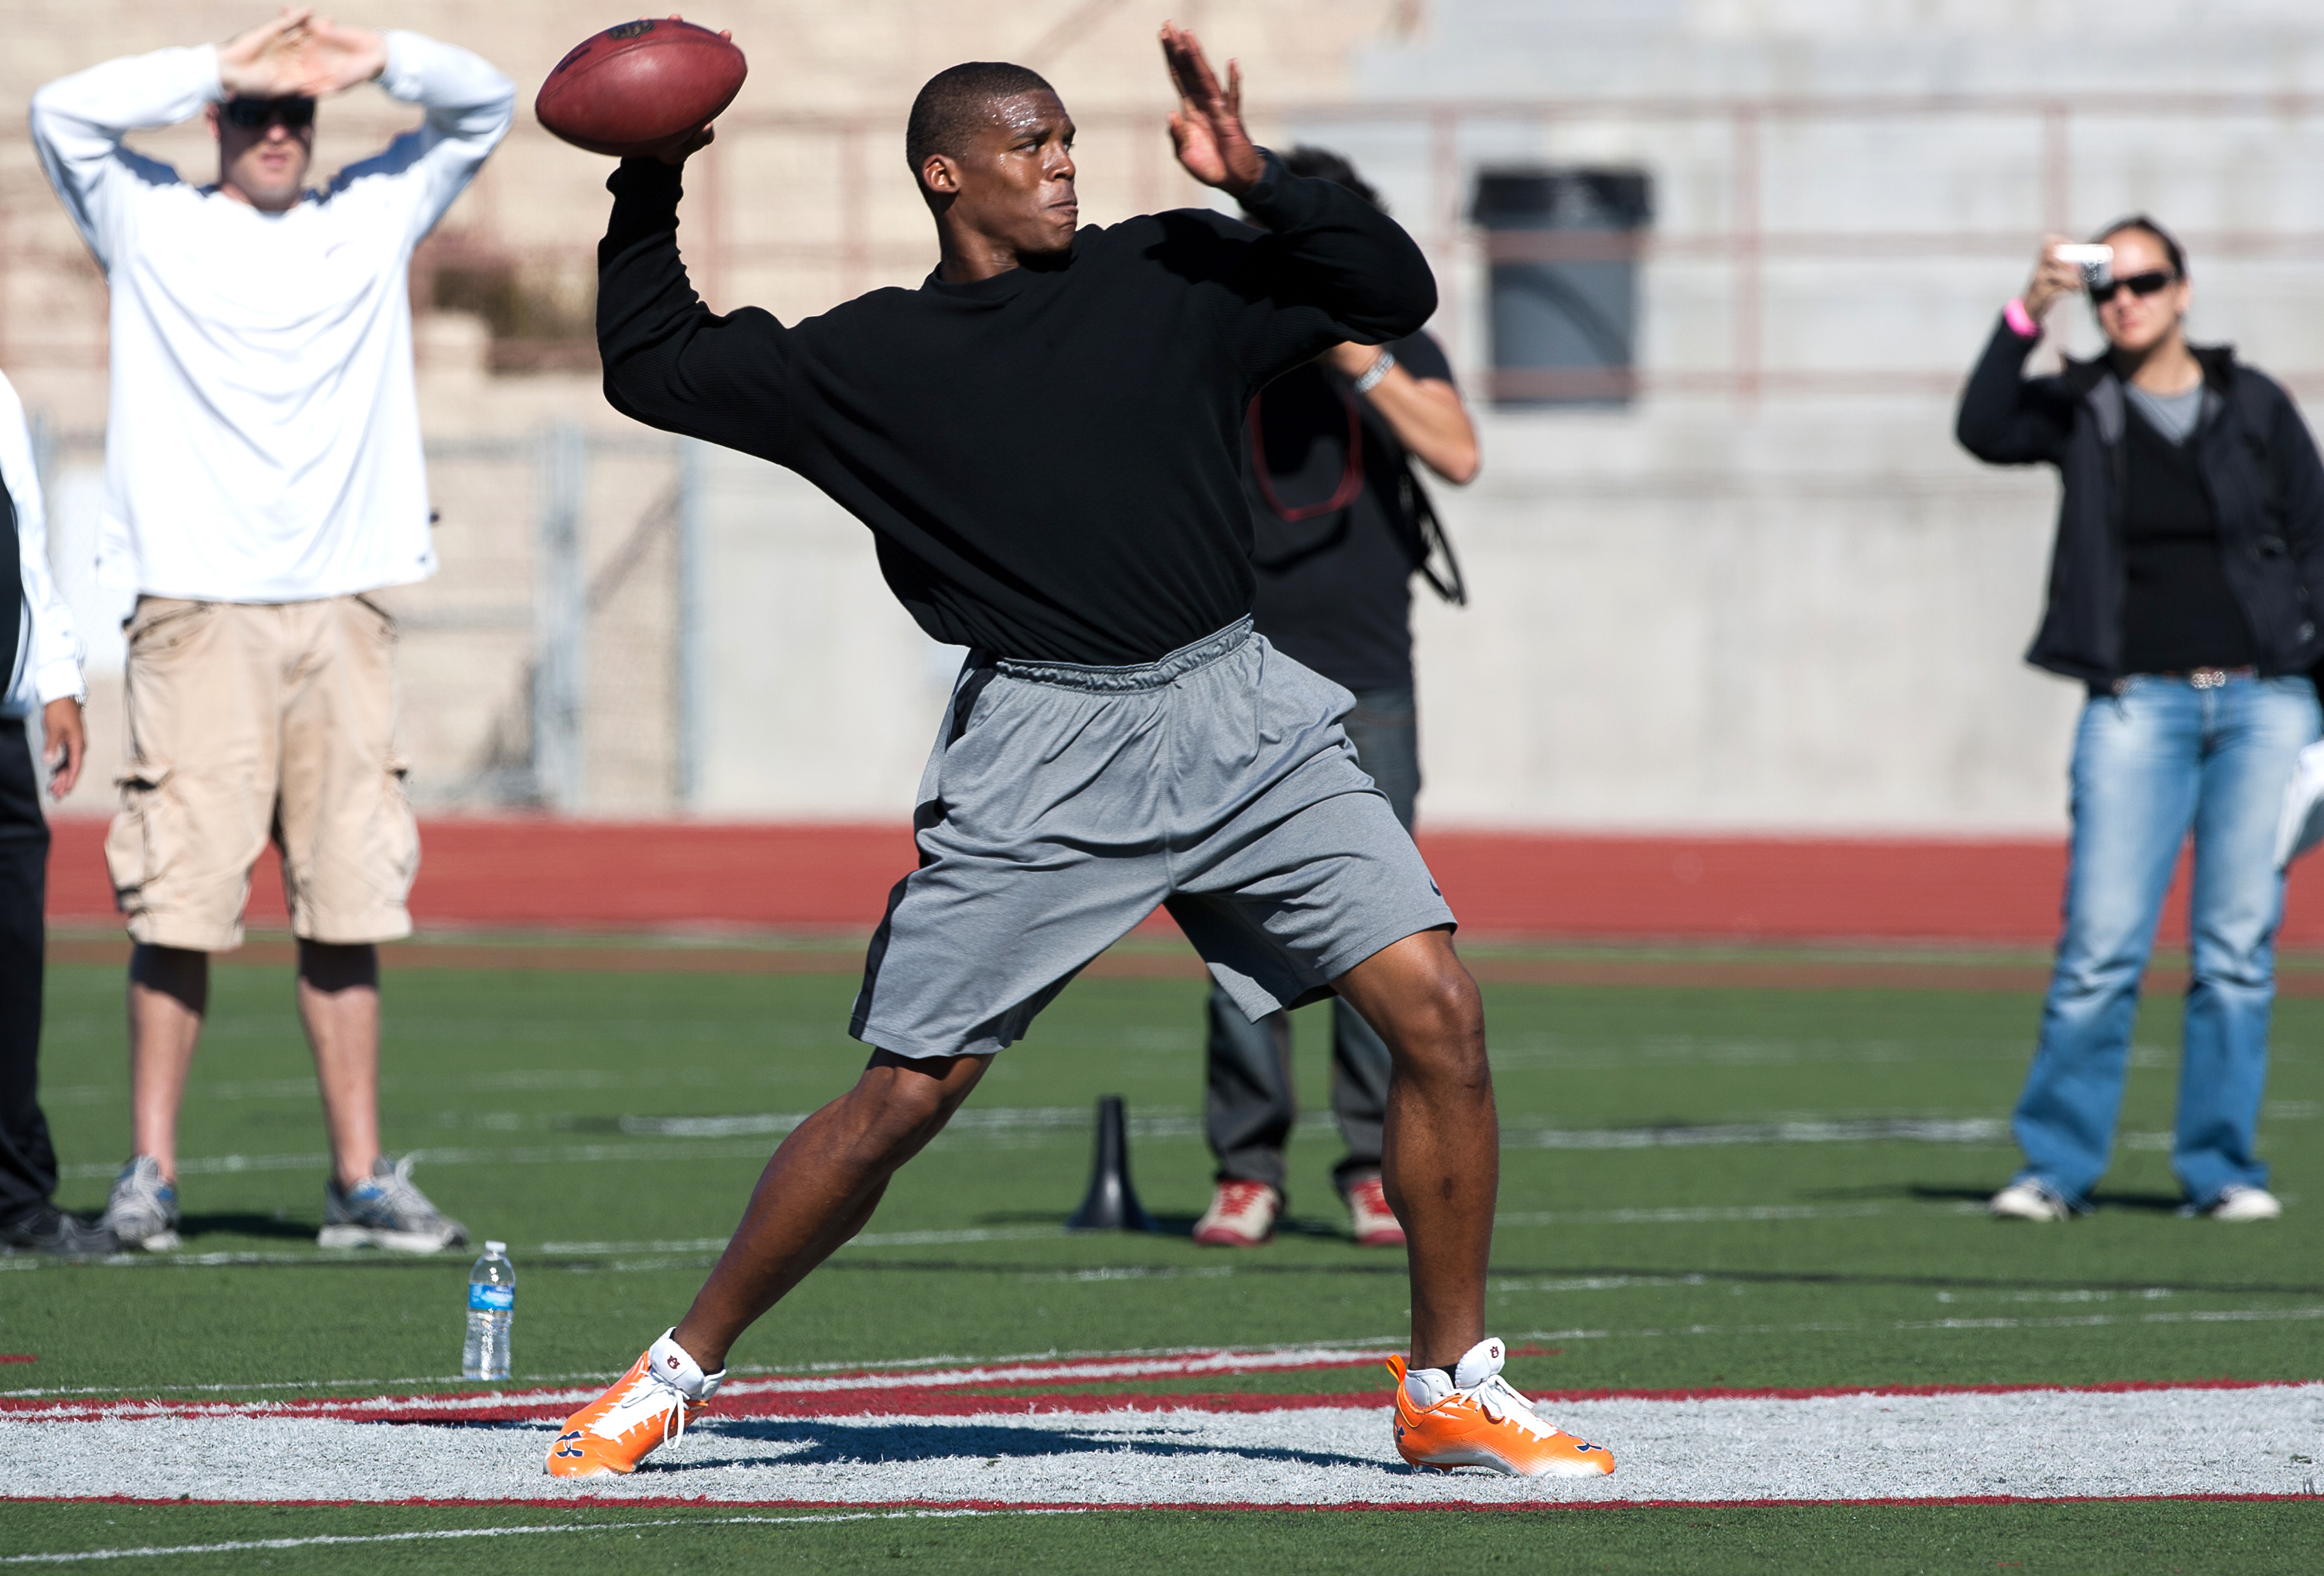 SAN DIEGO, CA - FEBRUARY 10: 2010 Heisman Trophy winning quarterback Cam Newton of Auburn throws the ball during his workout routine for the media at Cathedral High School's sports stadium on February 10, 2011 in San Diego, California. (Photo by Kent Horn